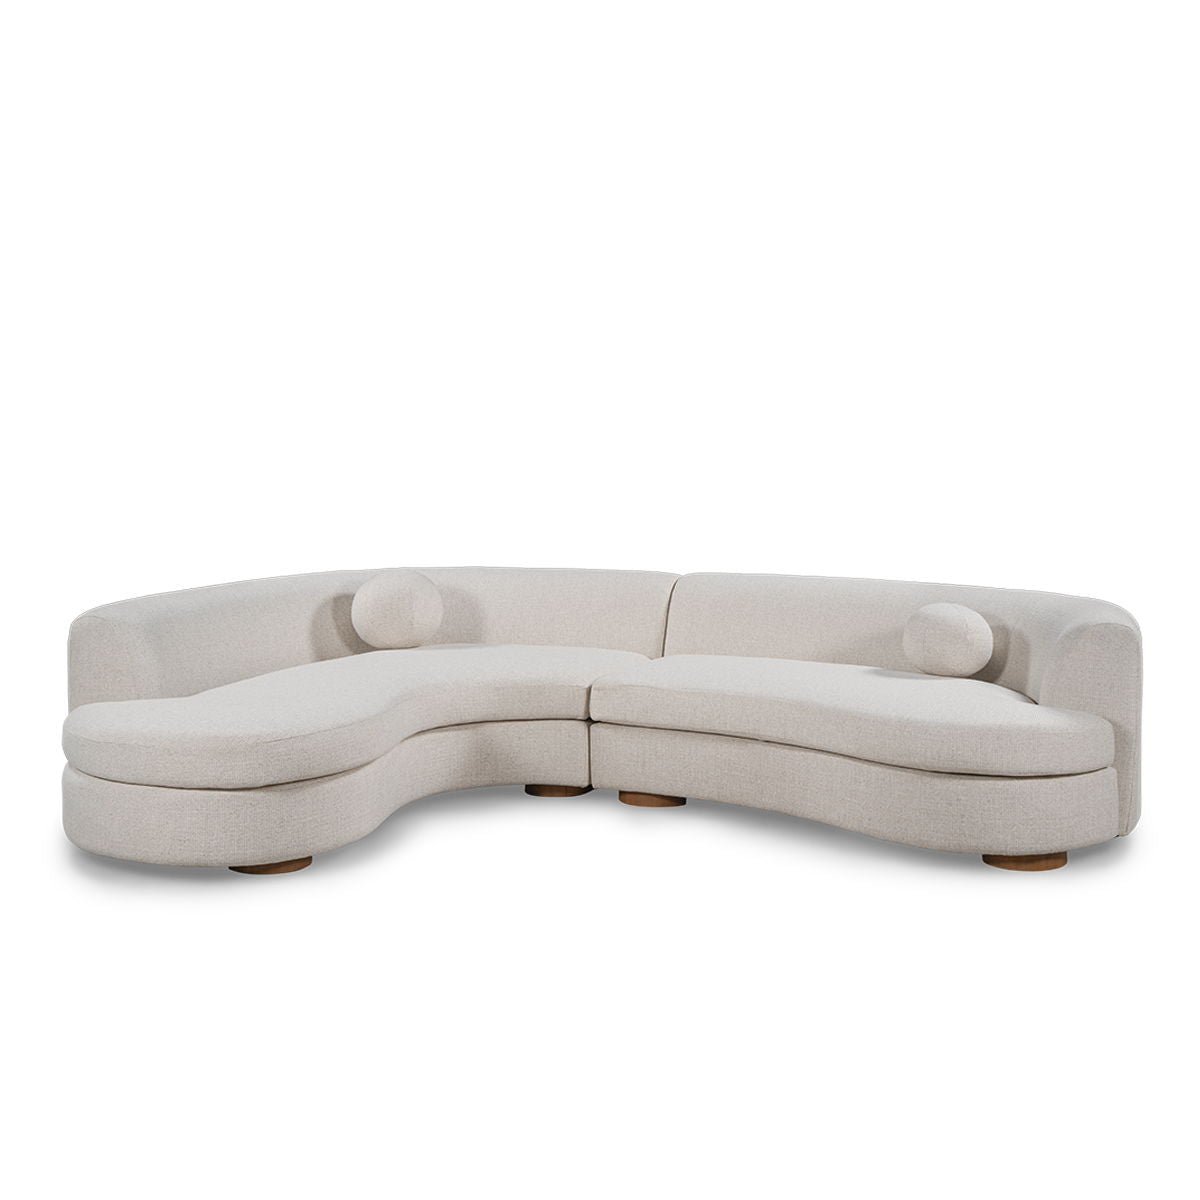 Concord - Sectional - Ivory